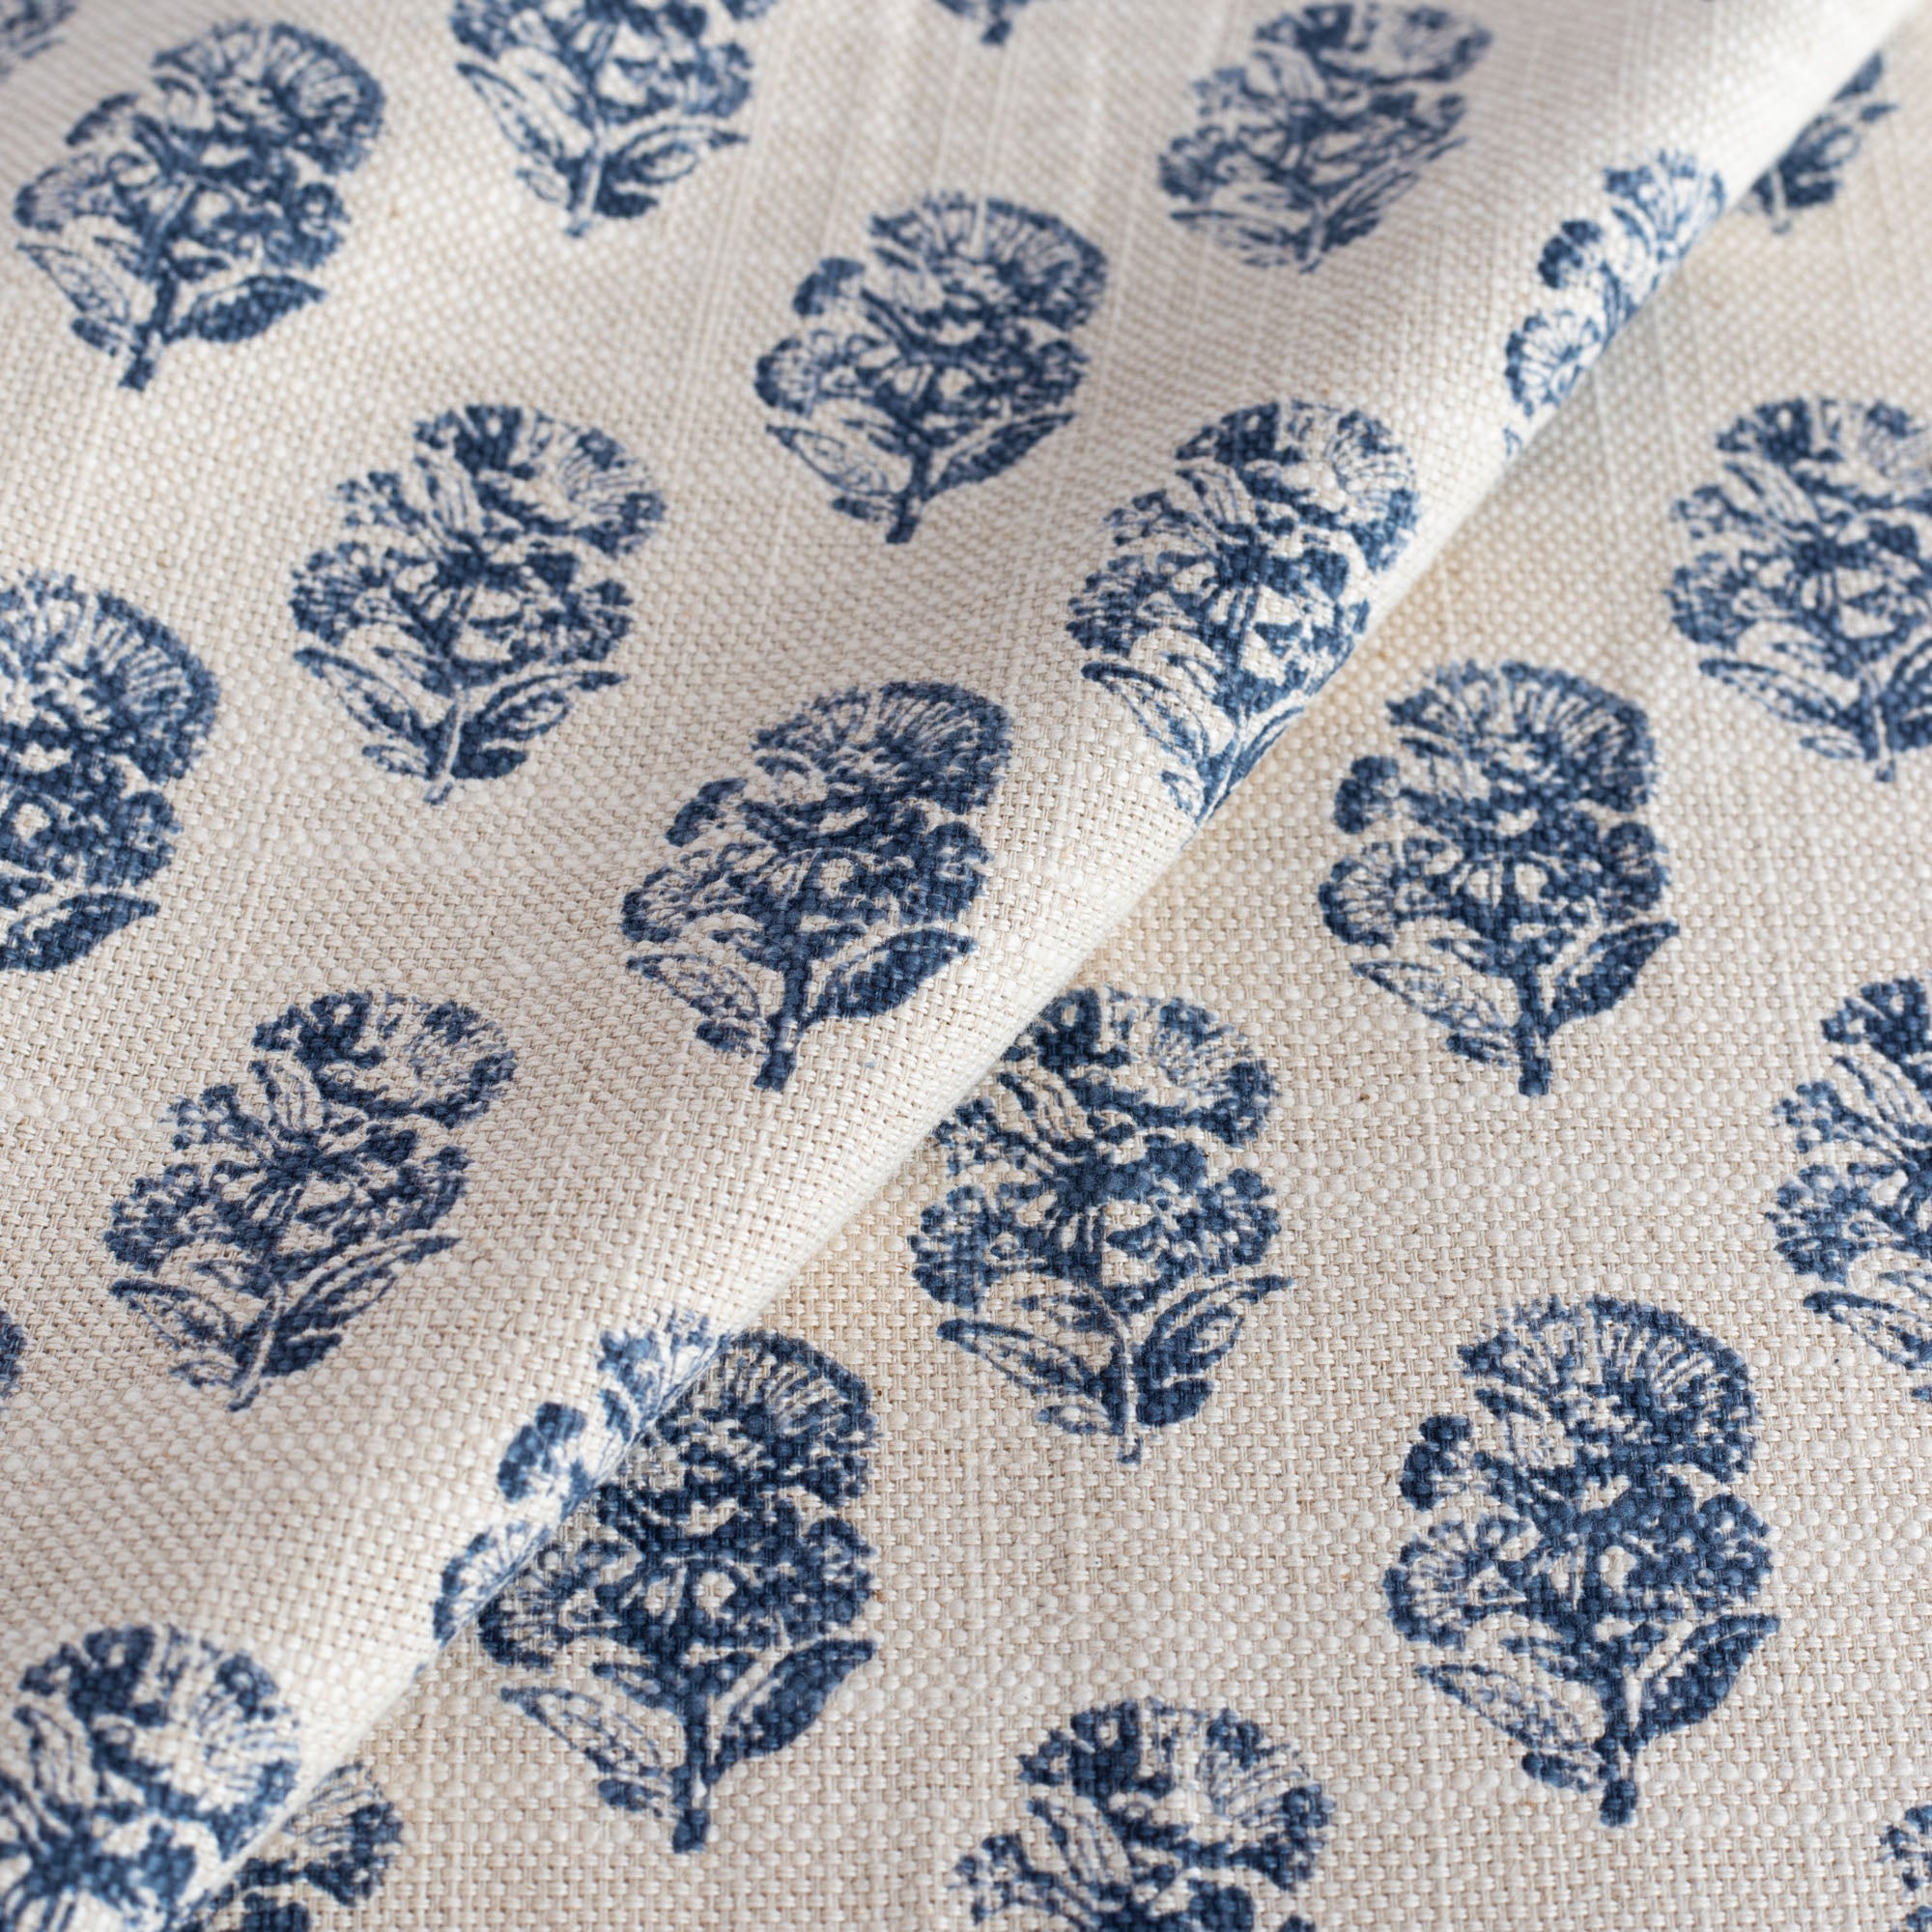 Indigo Blue and White Floral Print Upholstery Fabric by The Yard